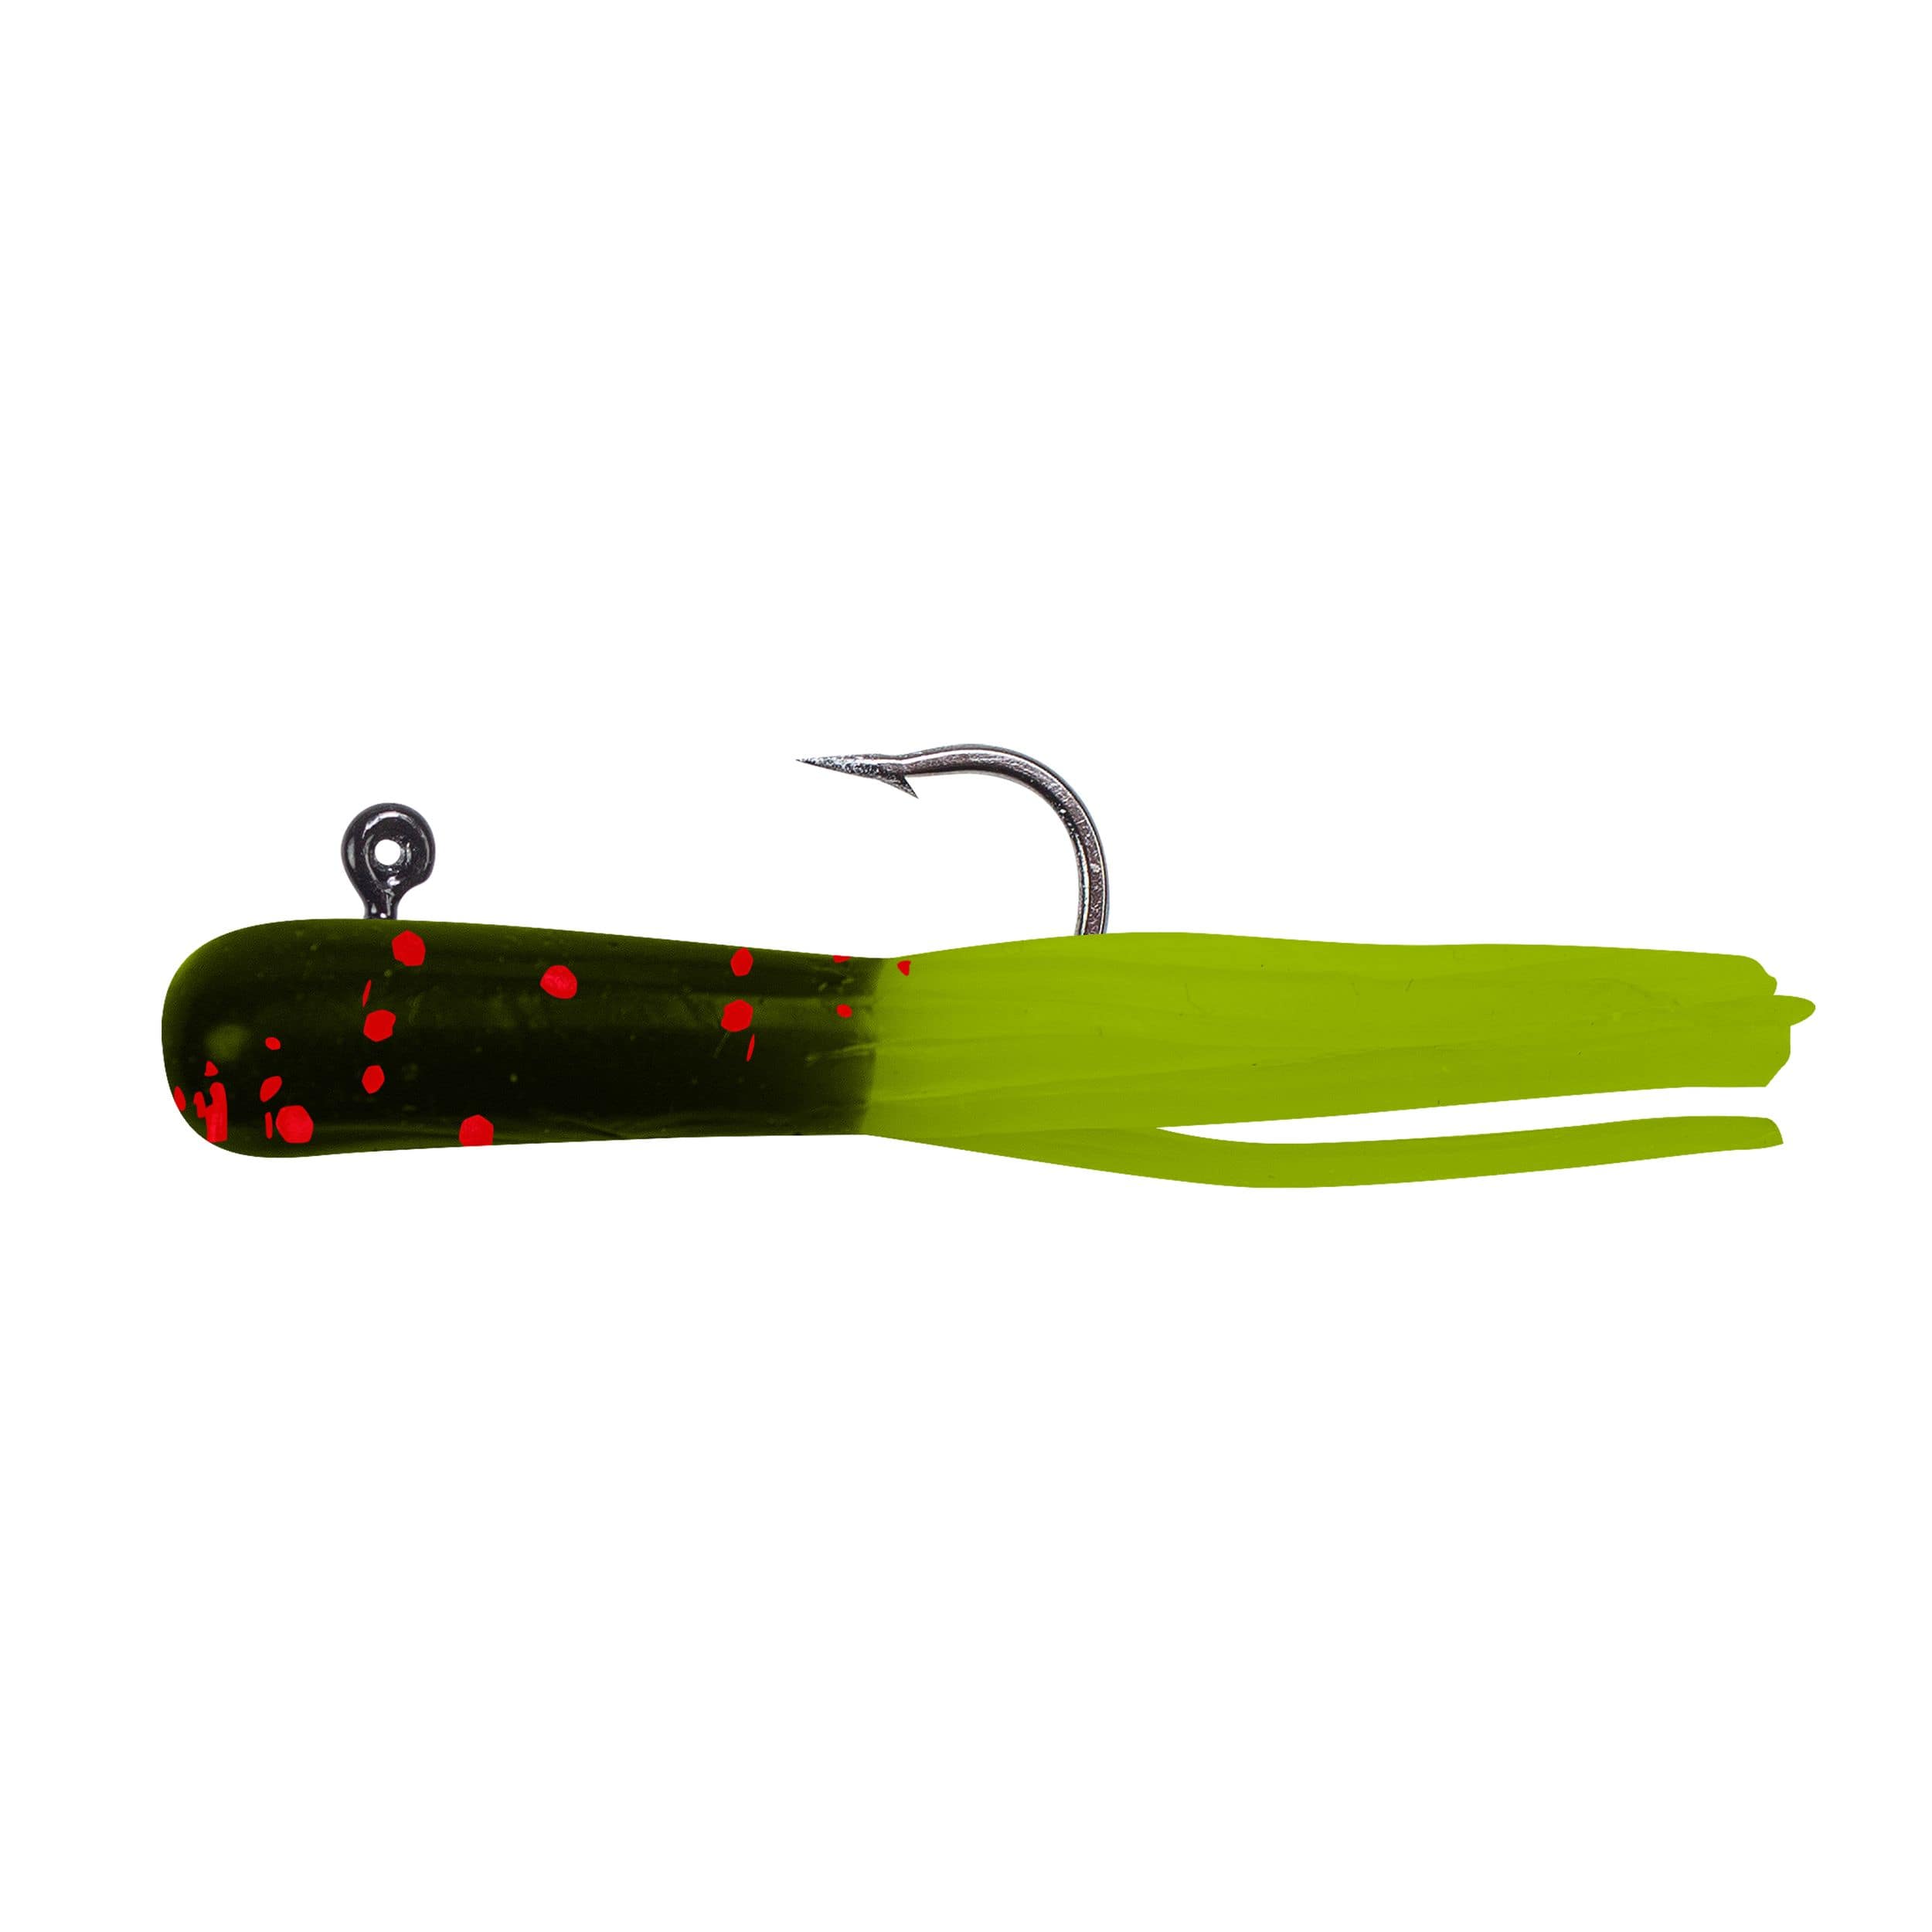 Fishing Baits Tadpole Fish Accessories Tackle Plastic Worm Attractive Lure